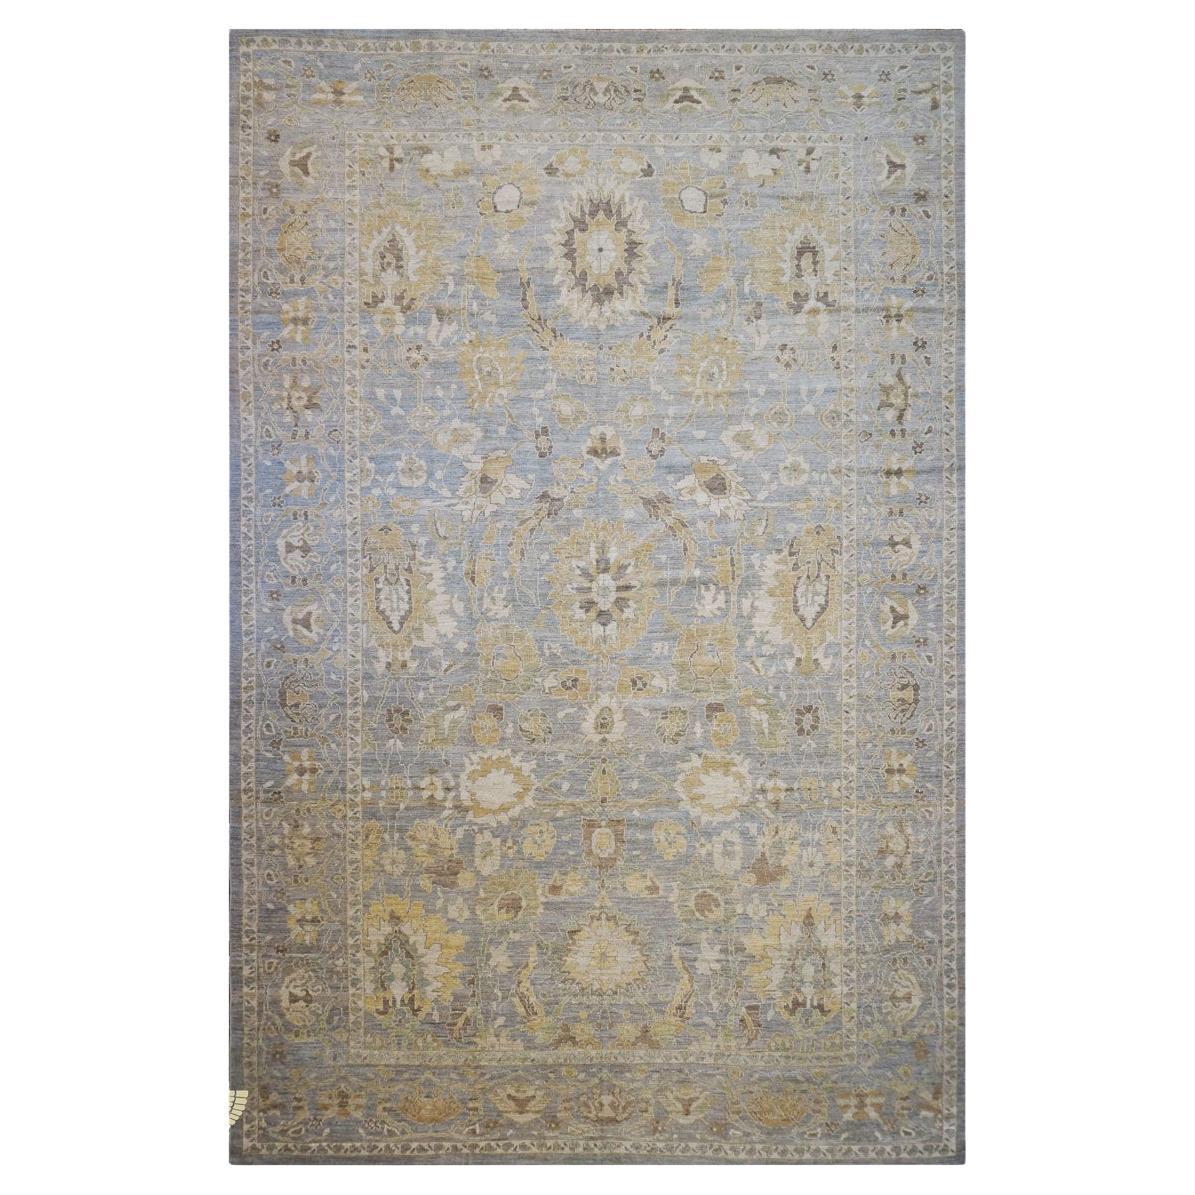 Oversized Persian Sultanabad Master 12x18 Blue, Grey, & Tan Handmade Area Rug For Sale